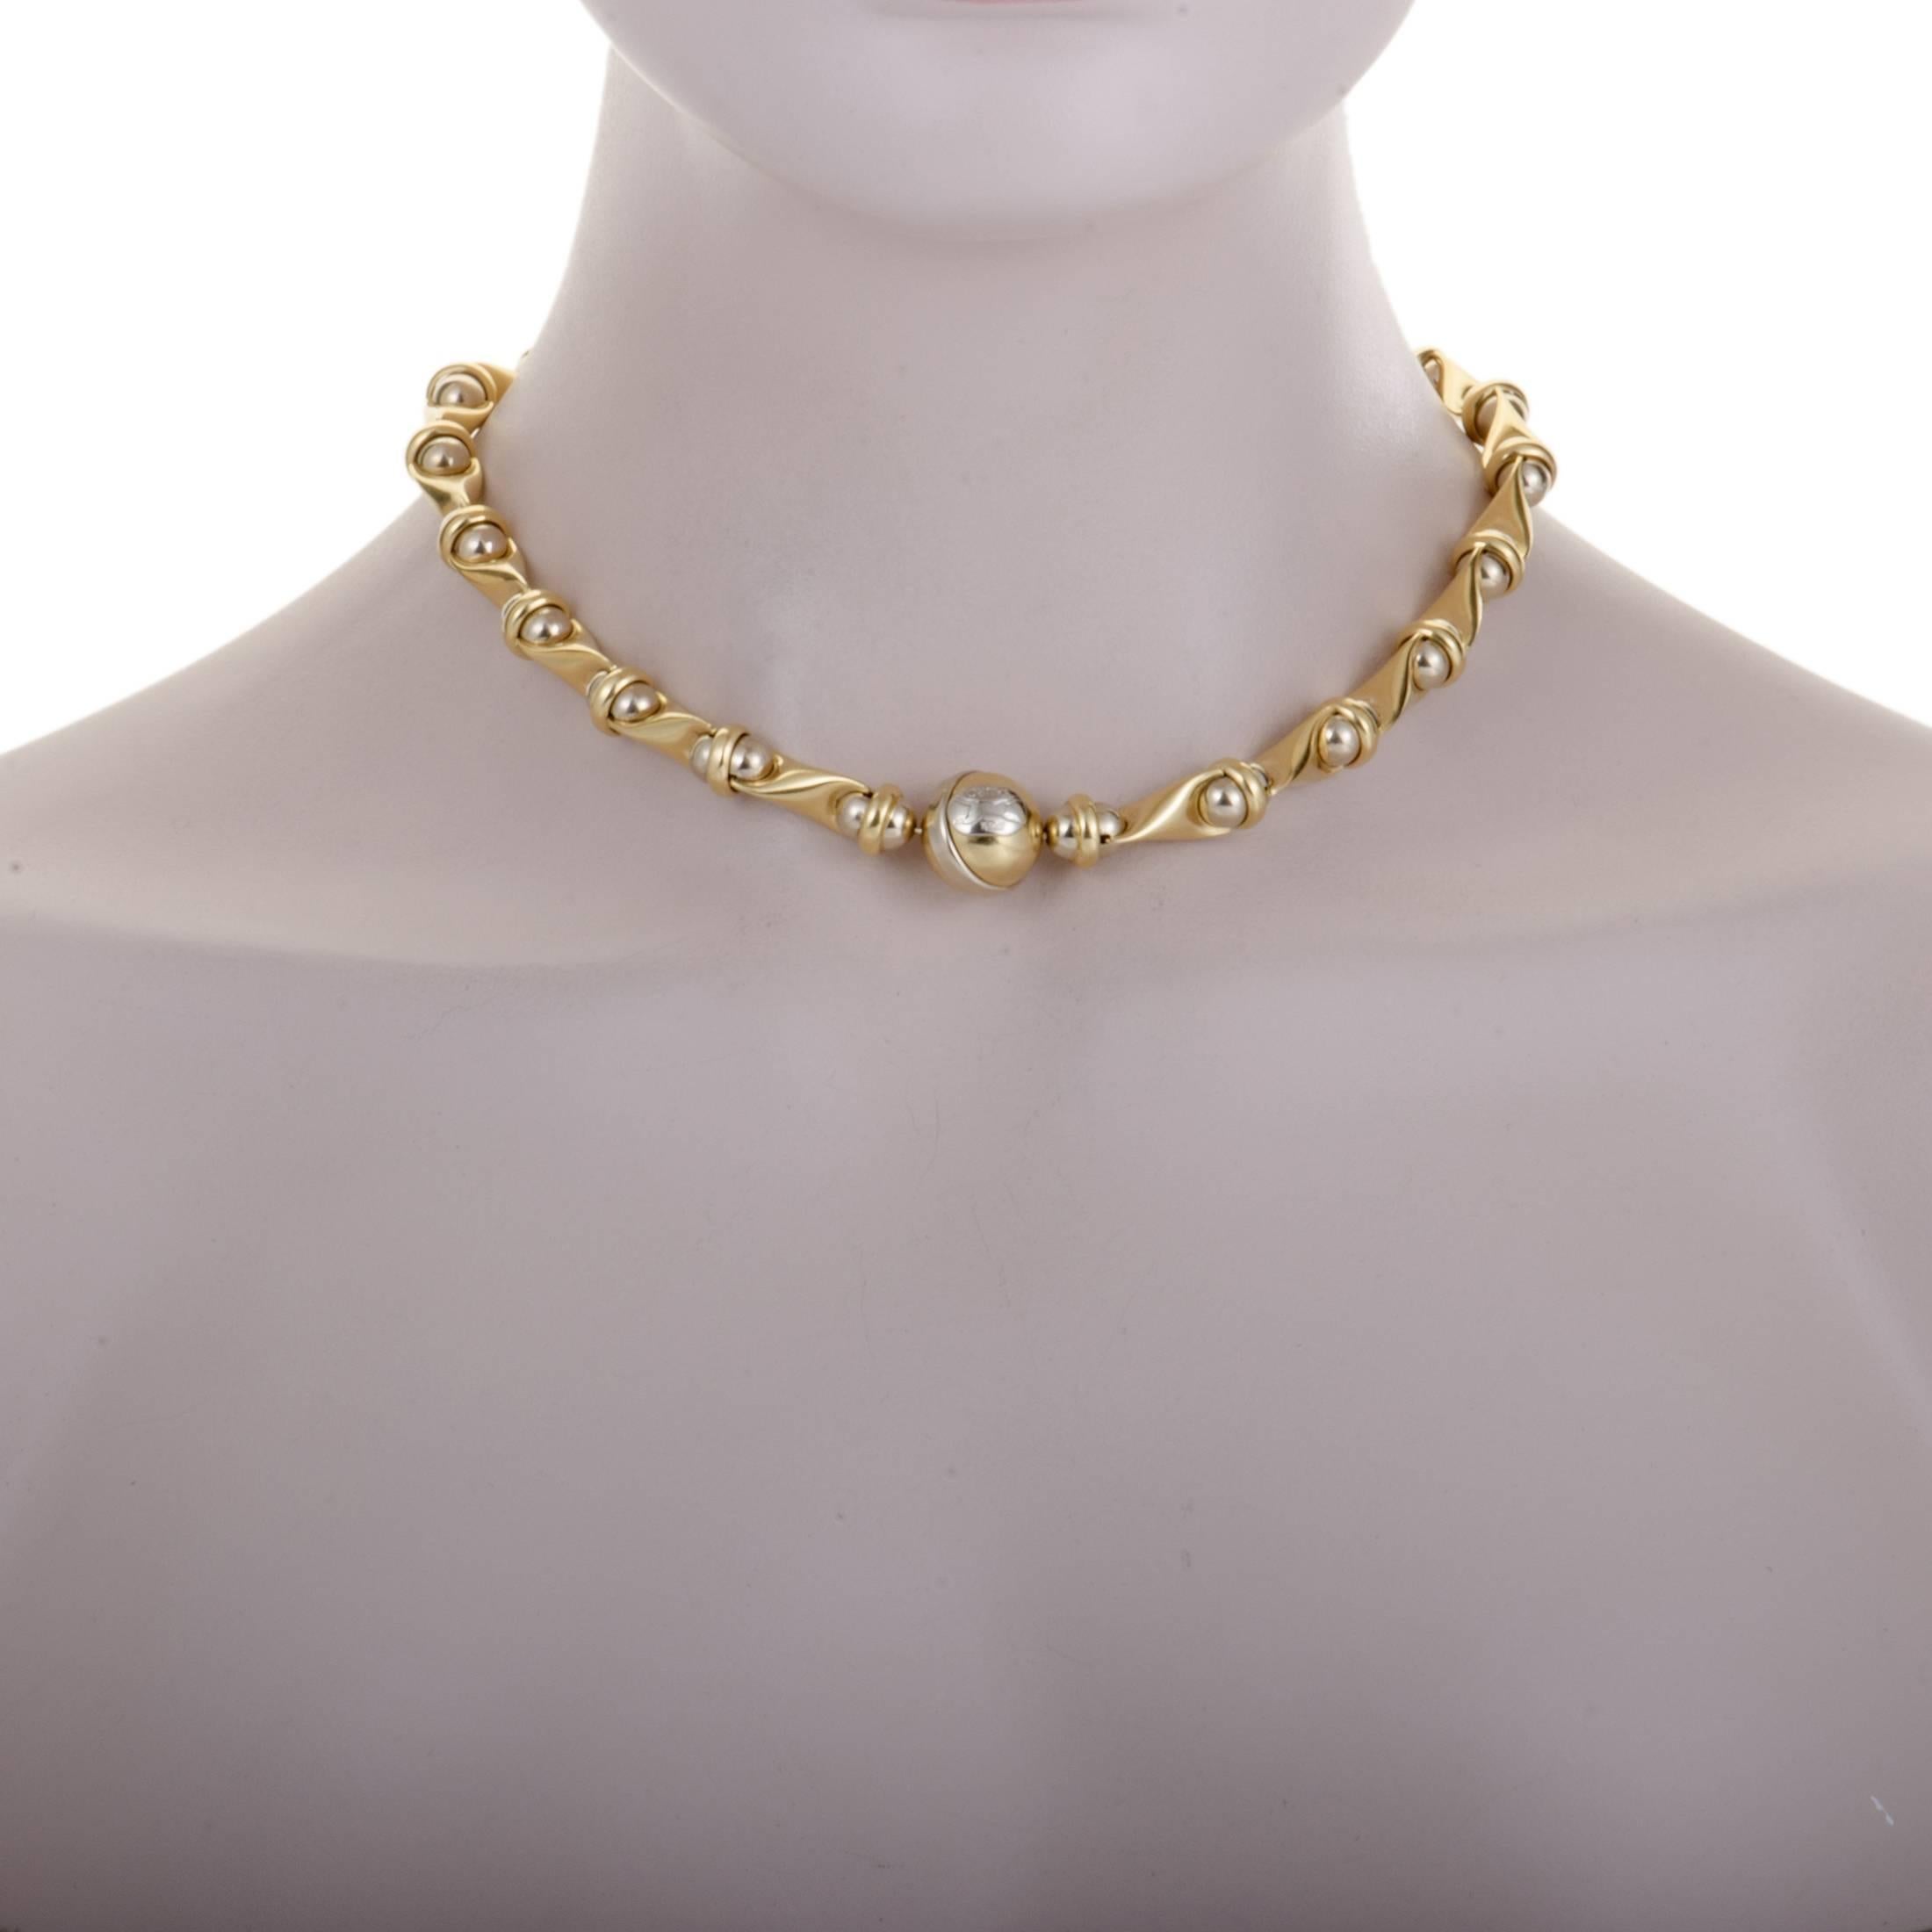 Featuring an extraordinarily bold design, this spectacular necklace offers an incredibly stylish appearance. Presented by Sauro, the necklace is crafted from the eye-catching combination of 18K yellow and white gold. 